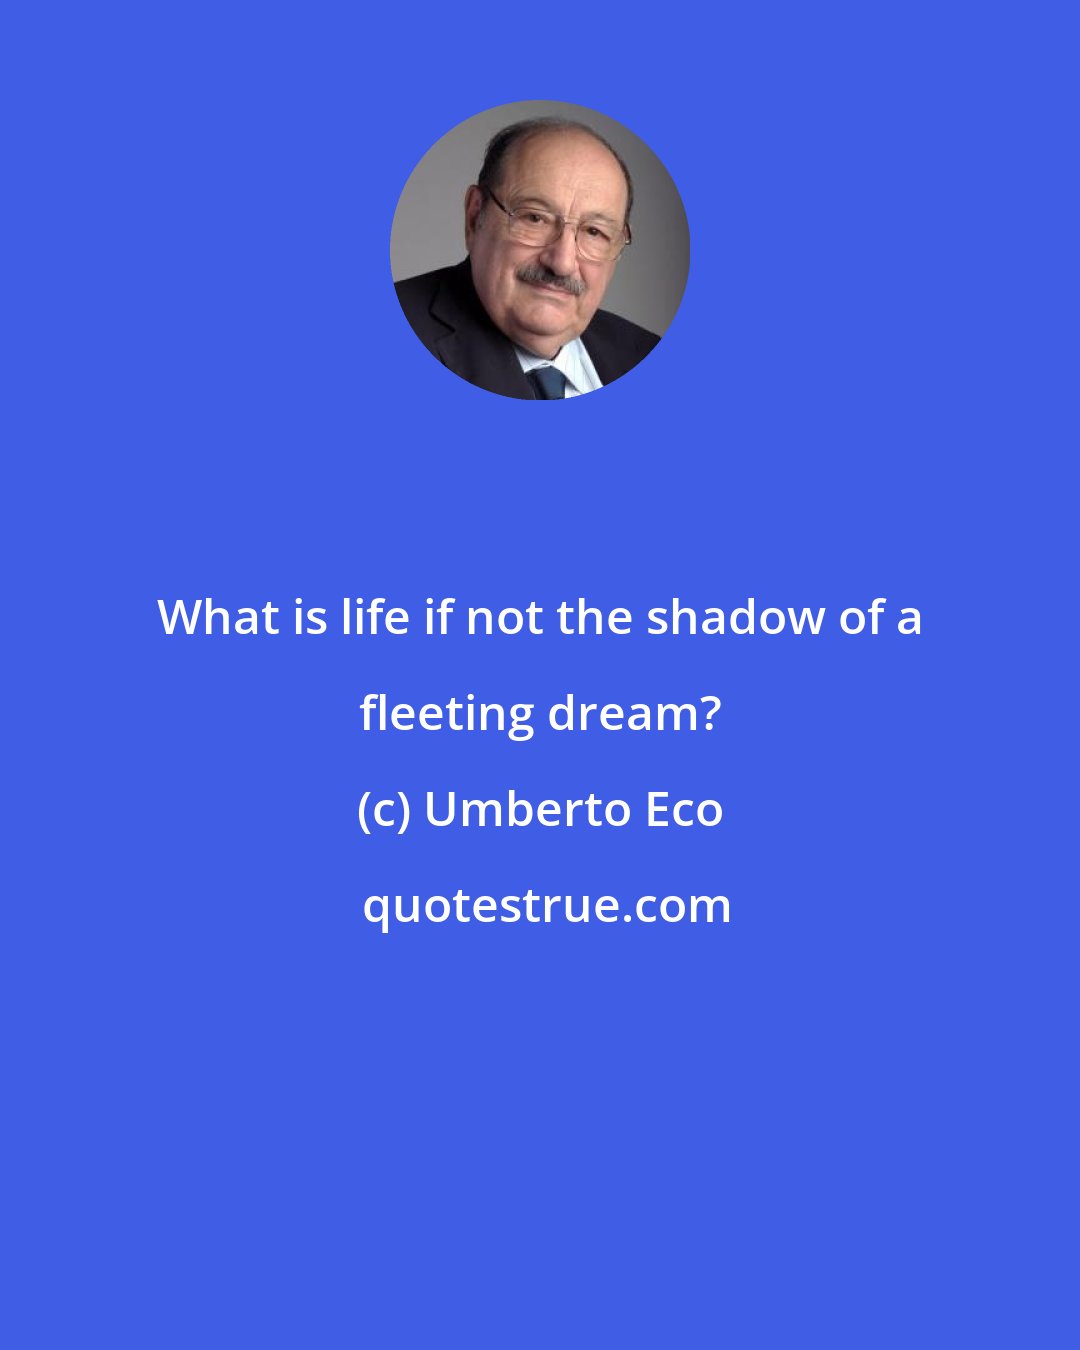 Umberto Eco: What is life if not the shadow of a fleeting dream?